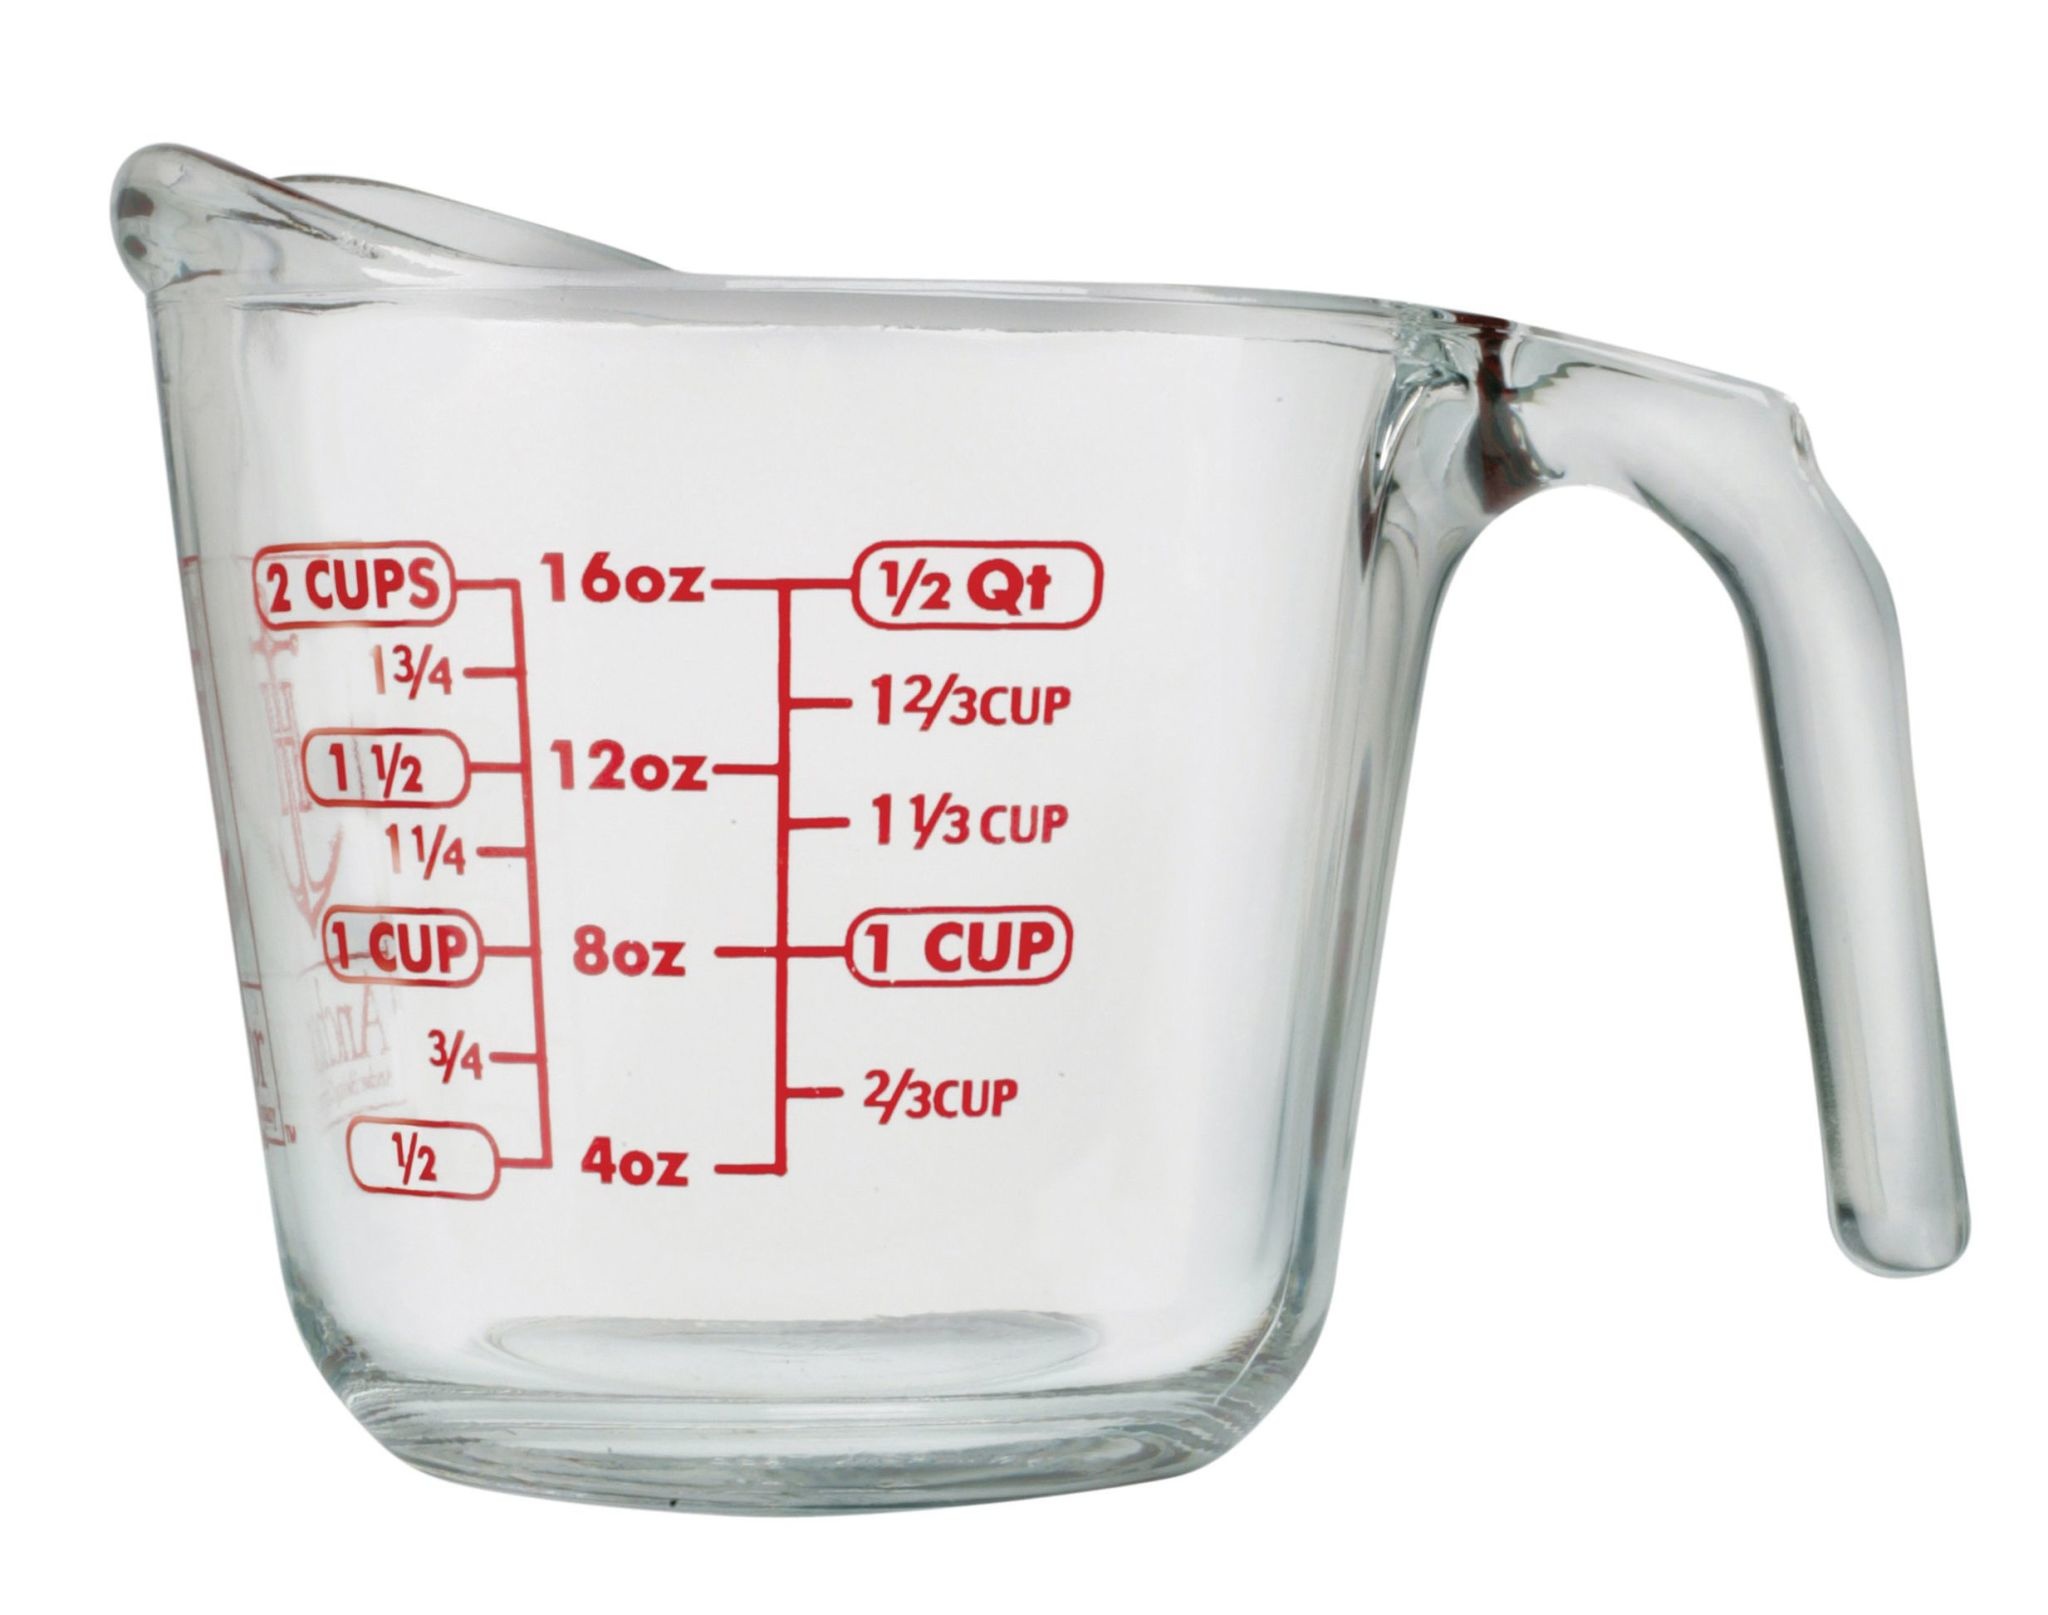 Anchor Hocking 2-Piece Glass Measuring Cup Set